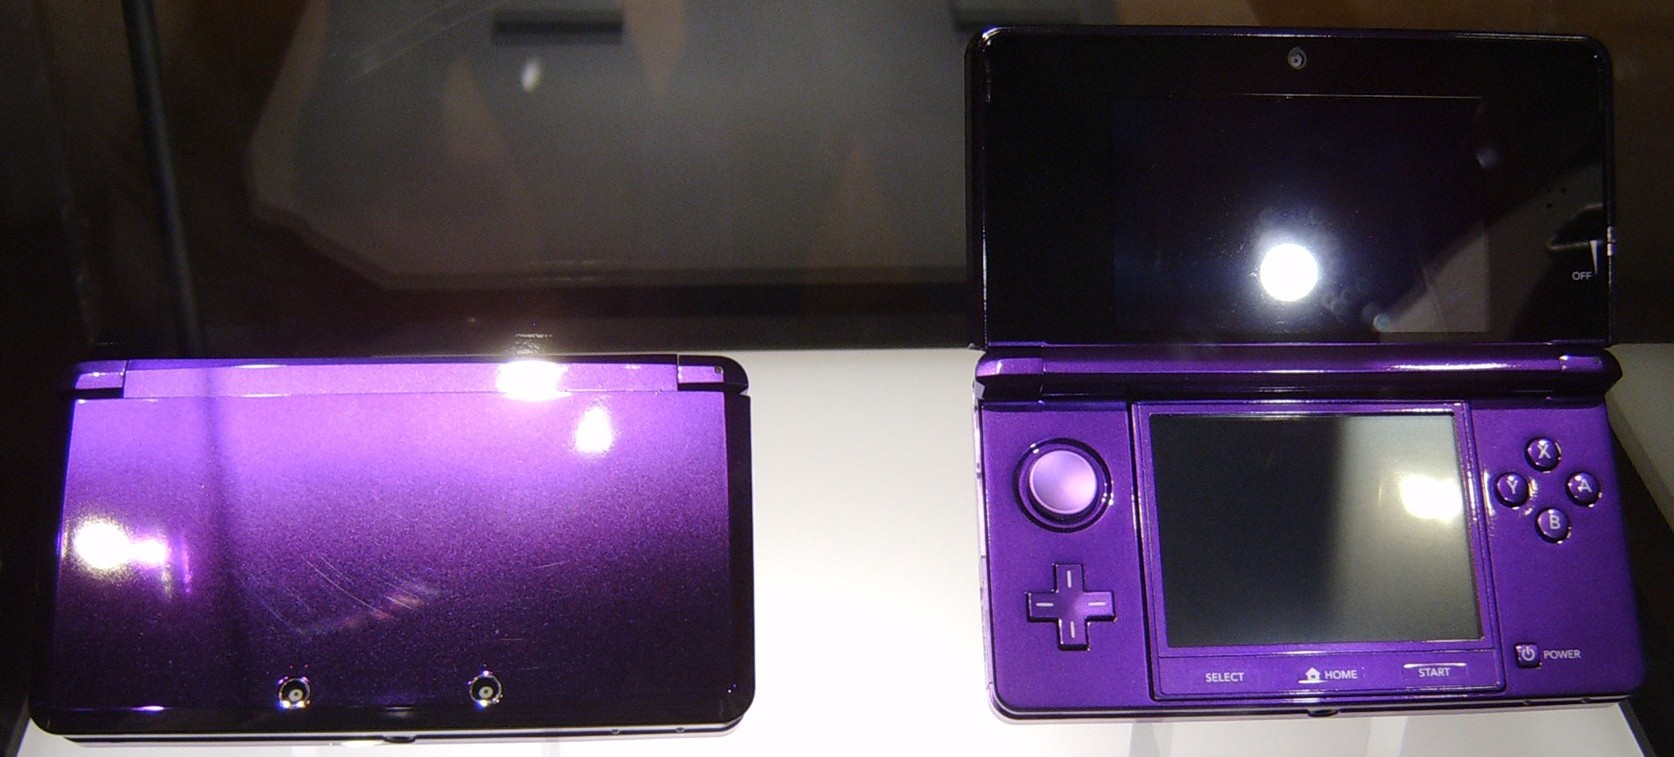 Midnight Purple Nintendo 3DS Announced By Another Retailer - My Nintendo  News